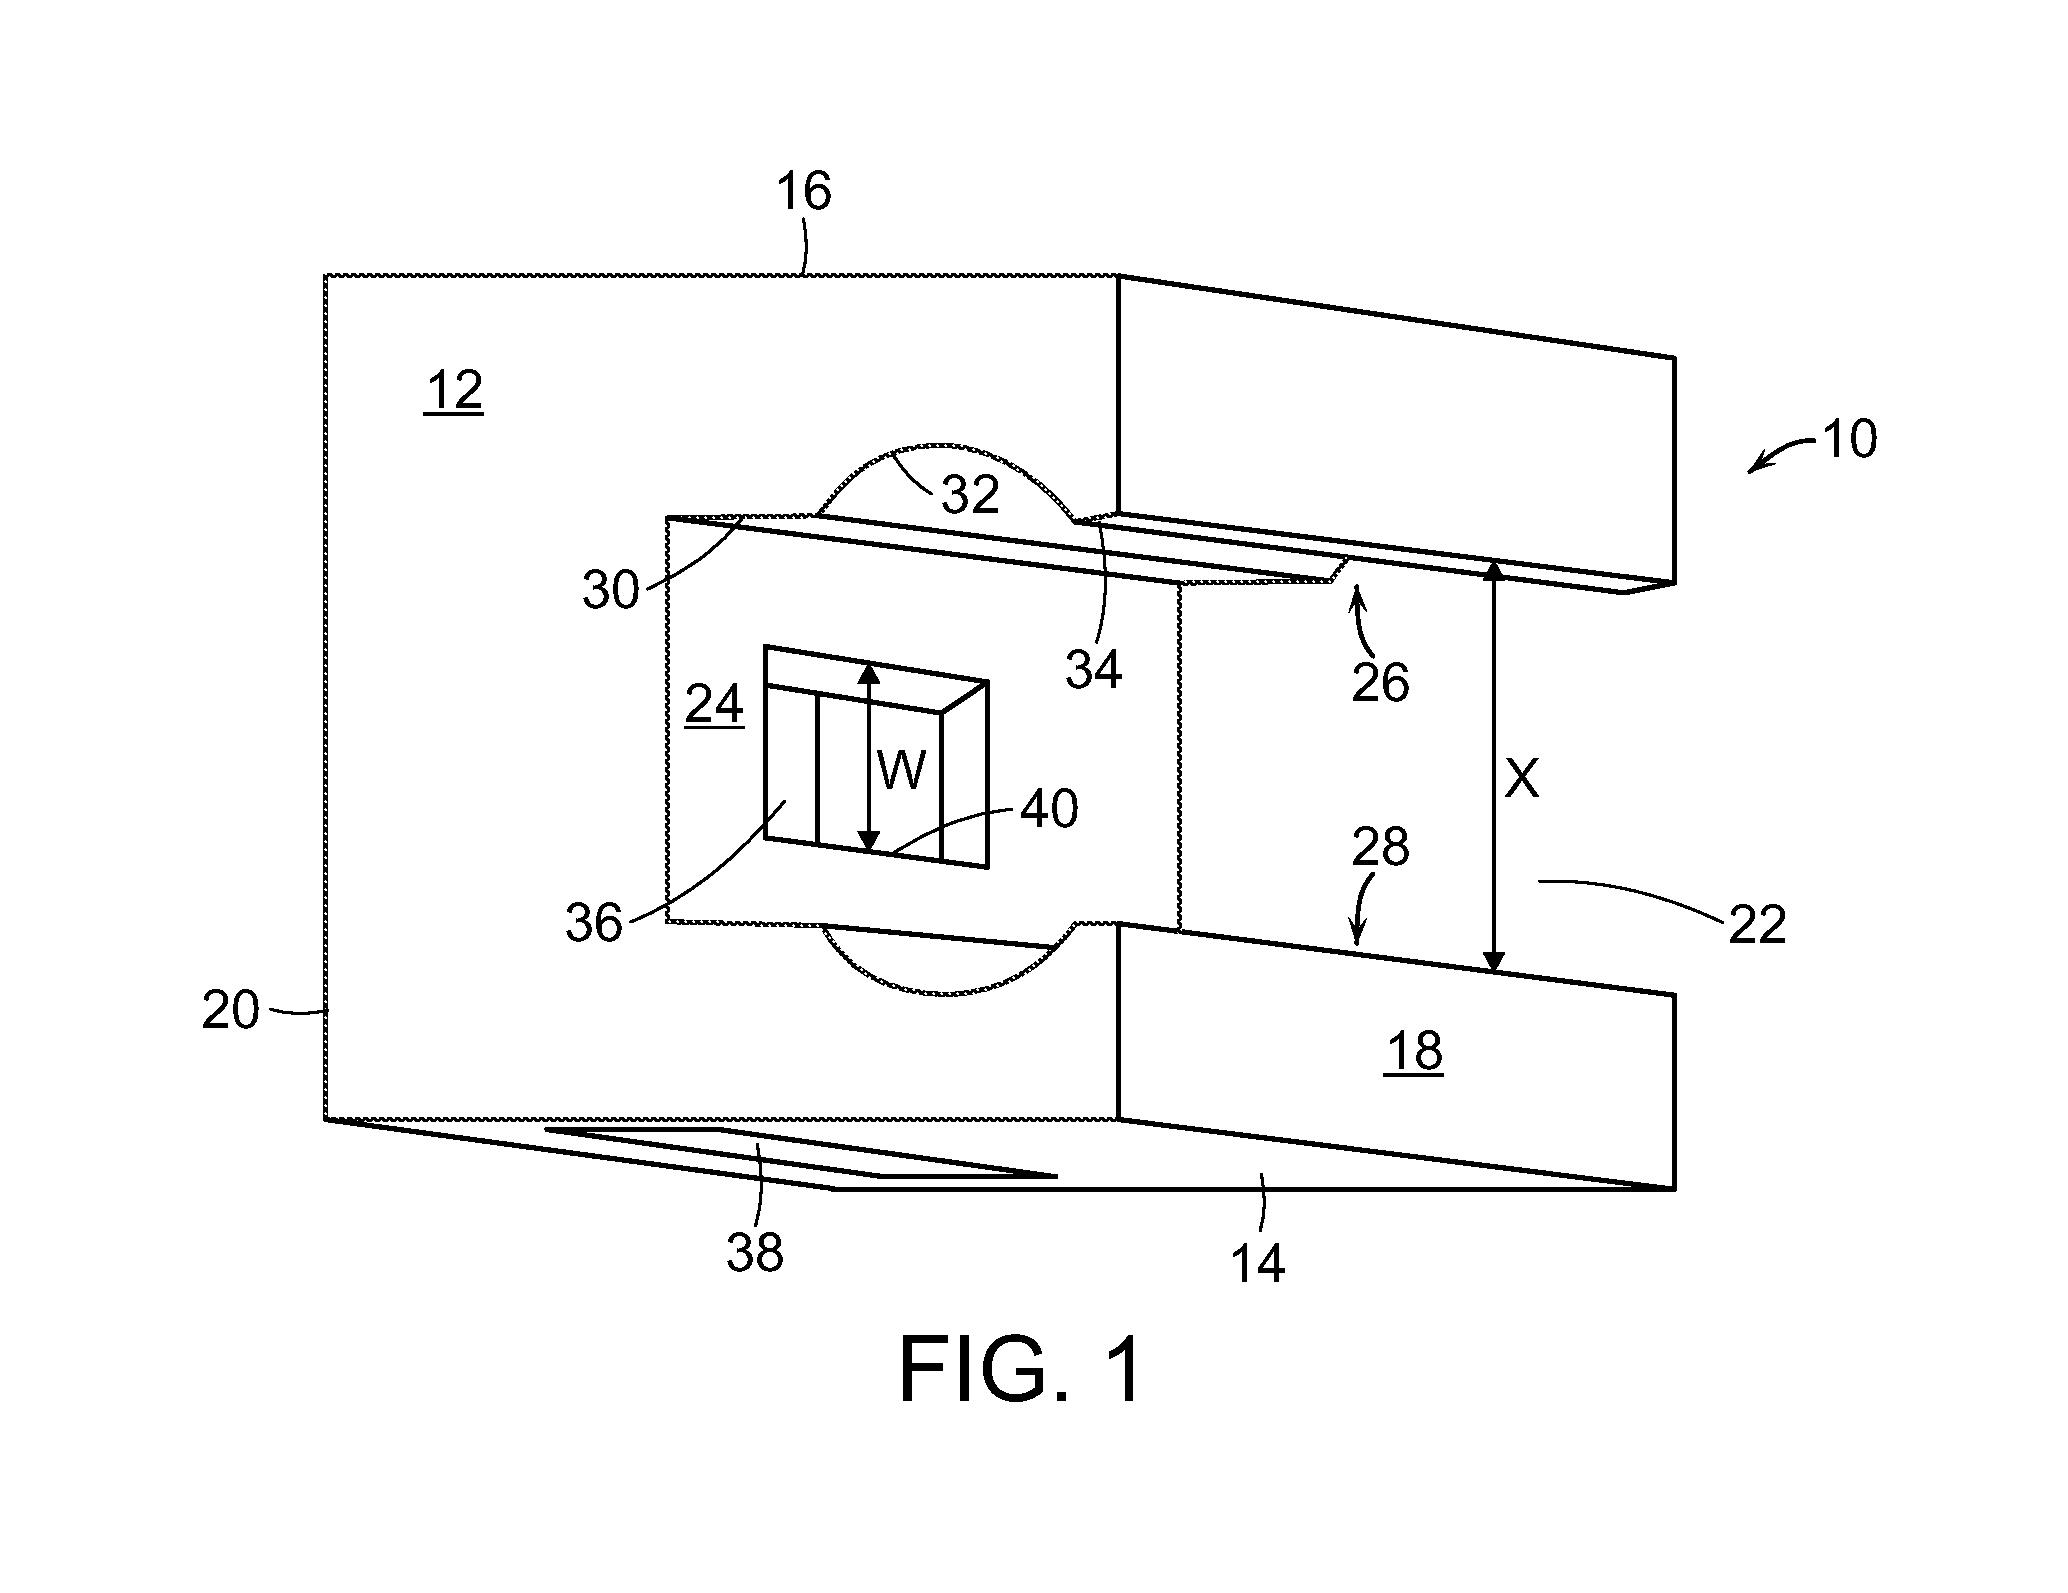 Light mixing chamber for use with color converting material and light guide plate and assembly